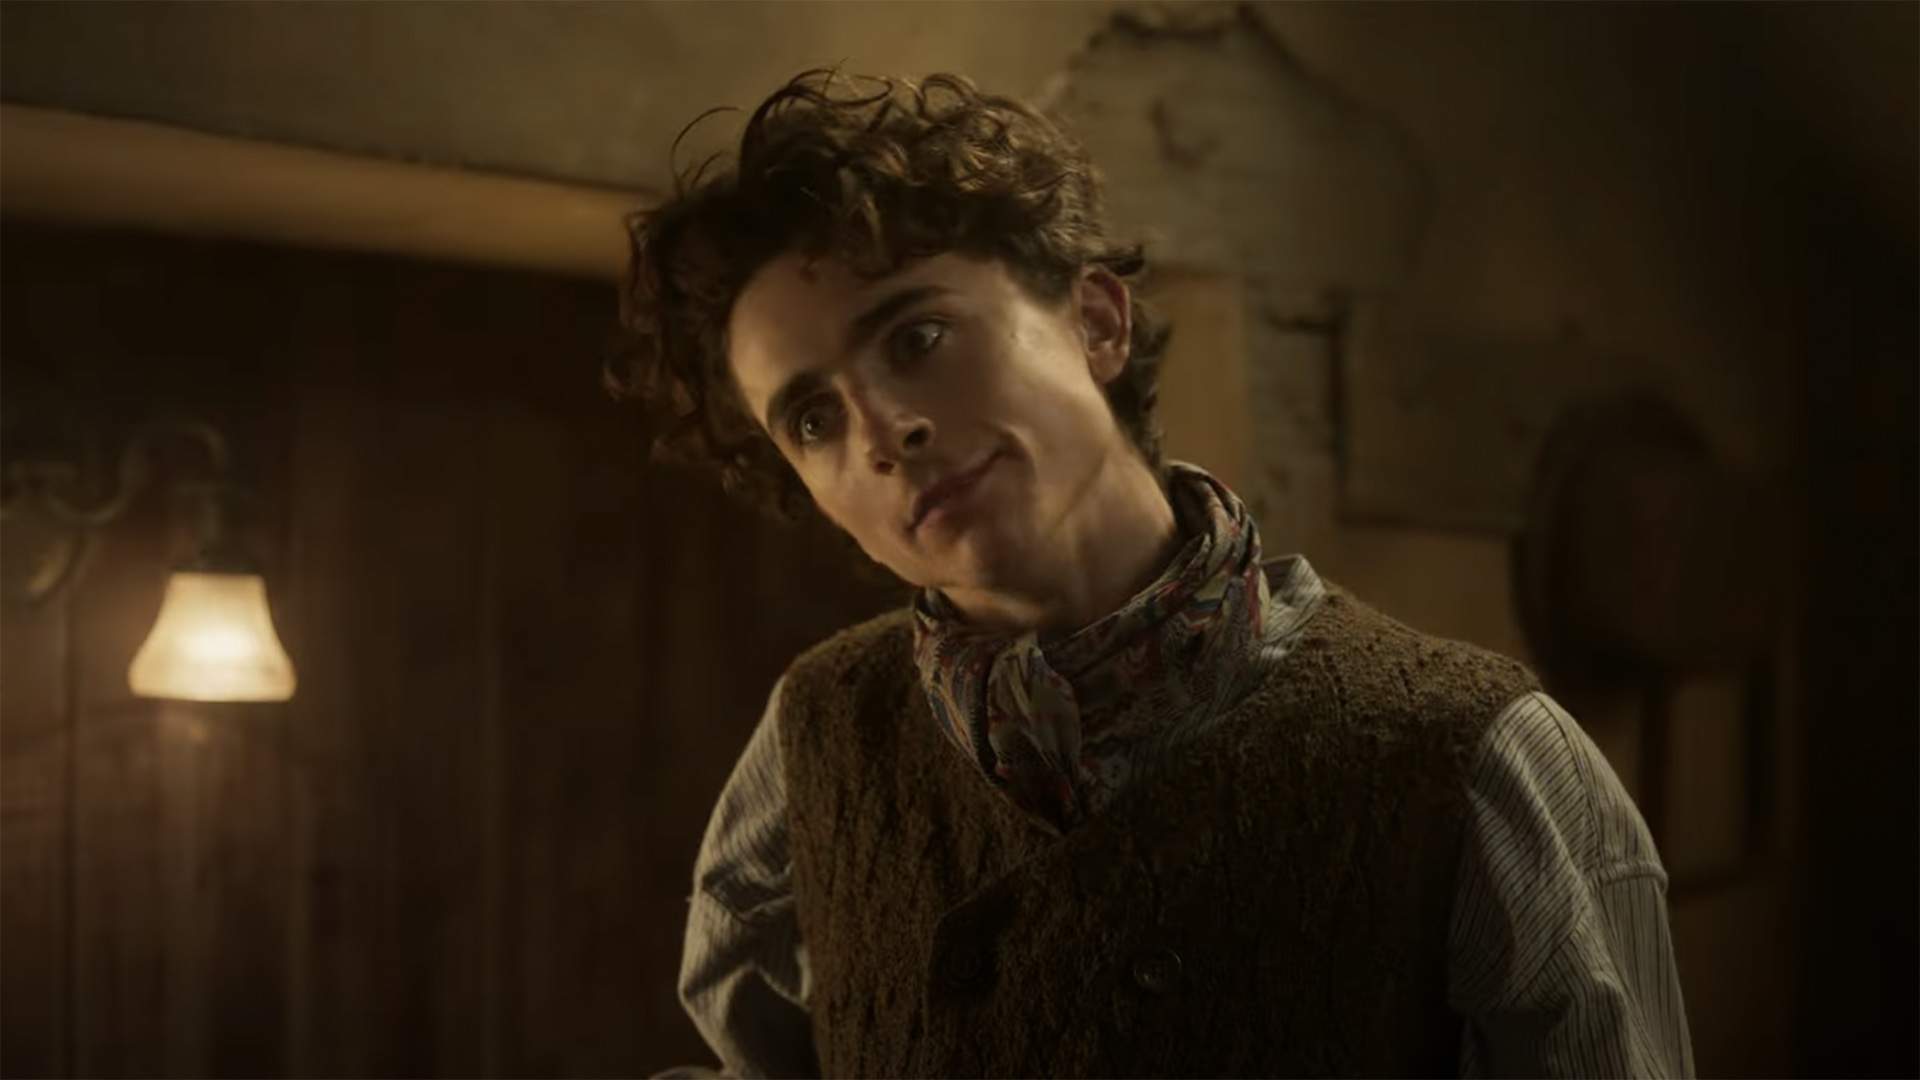 The Sweet First Trailer for 'Wonka' Takes Timothée Chalamet to a World of Pure Imagination